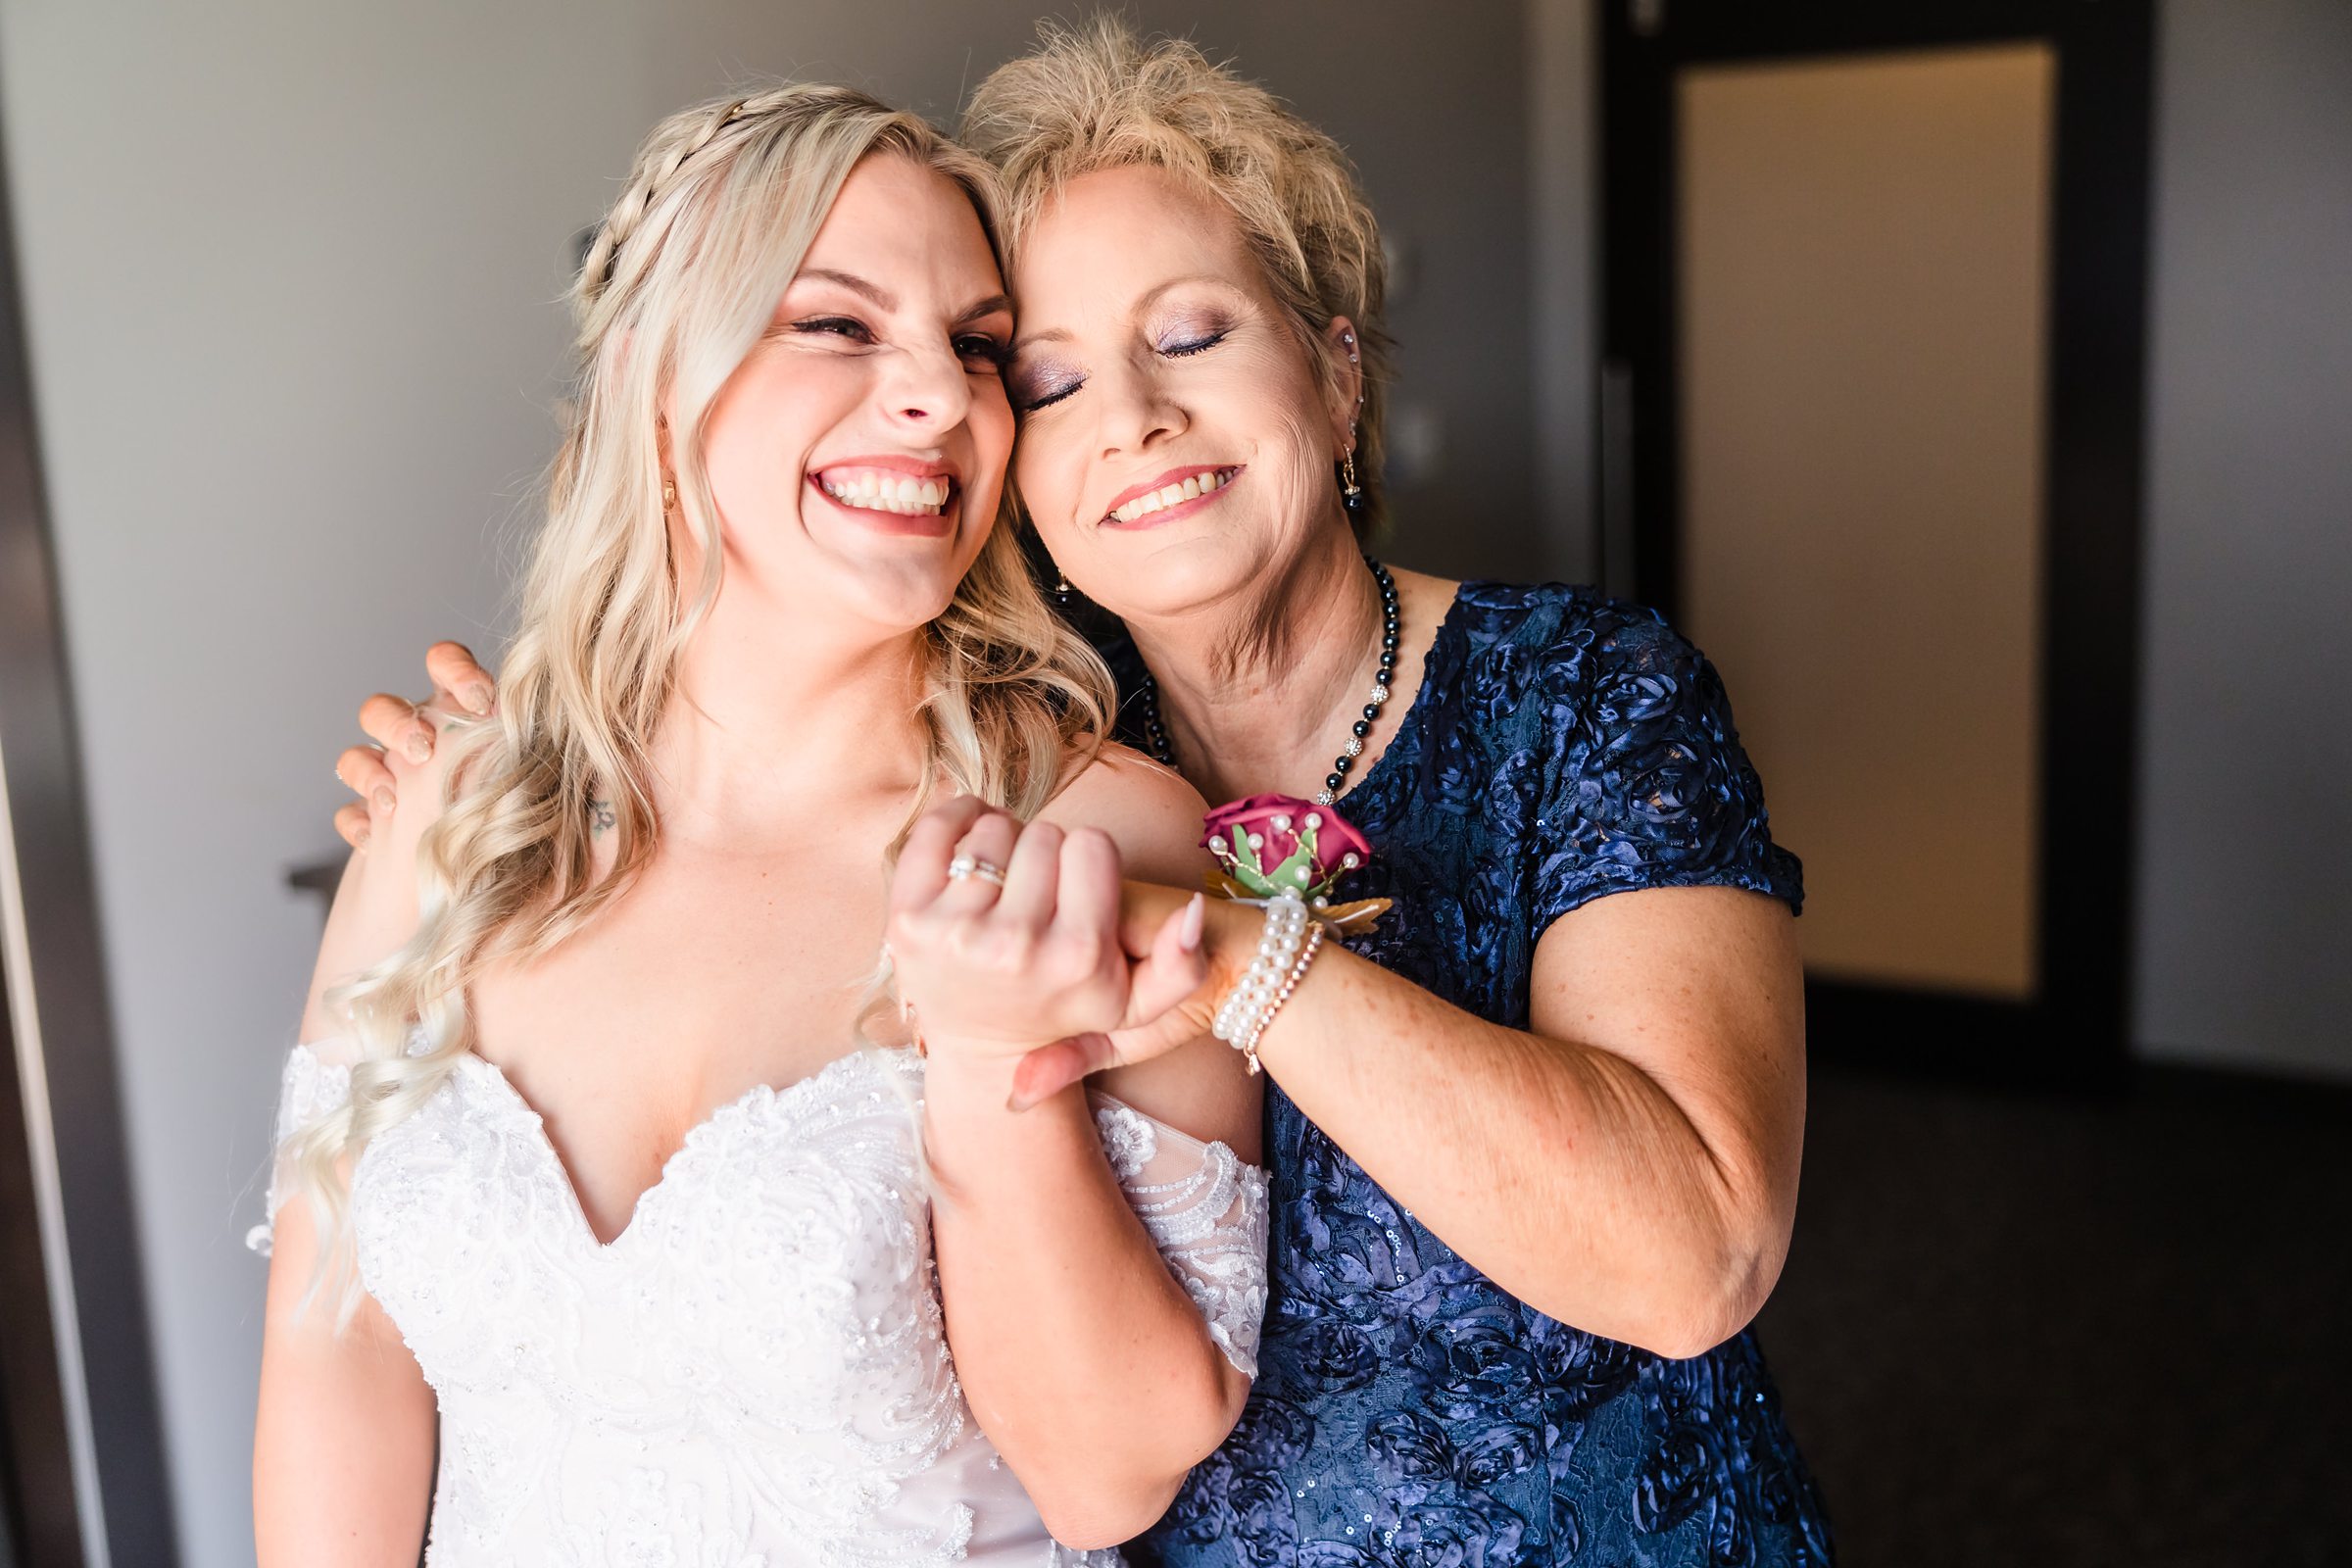 Bride and her mom embrace before the wedding at the Warehouse on State in Peoria, Illinois